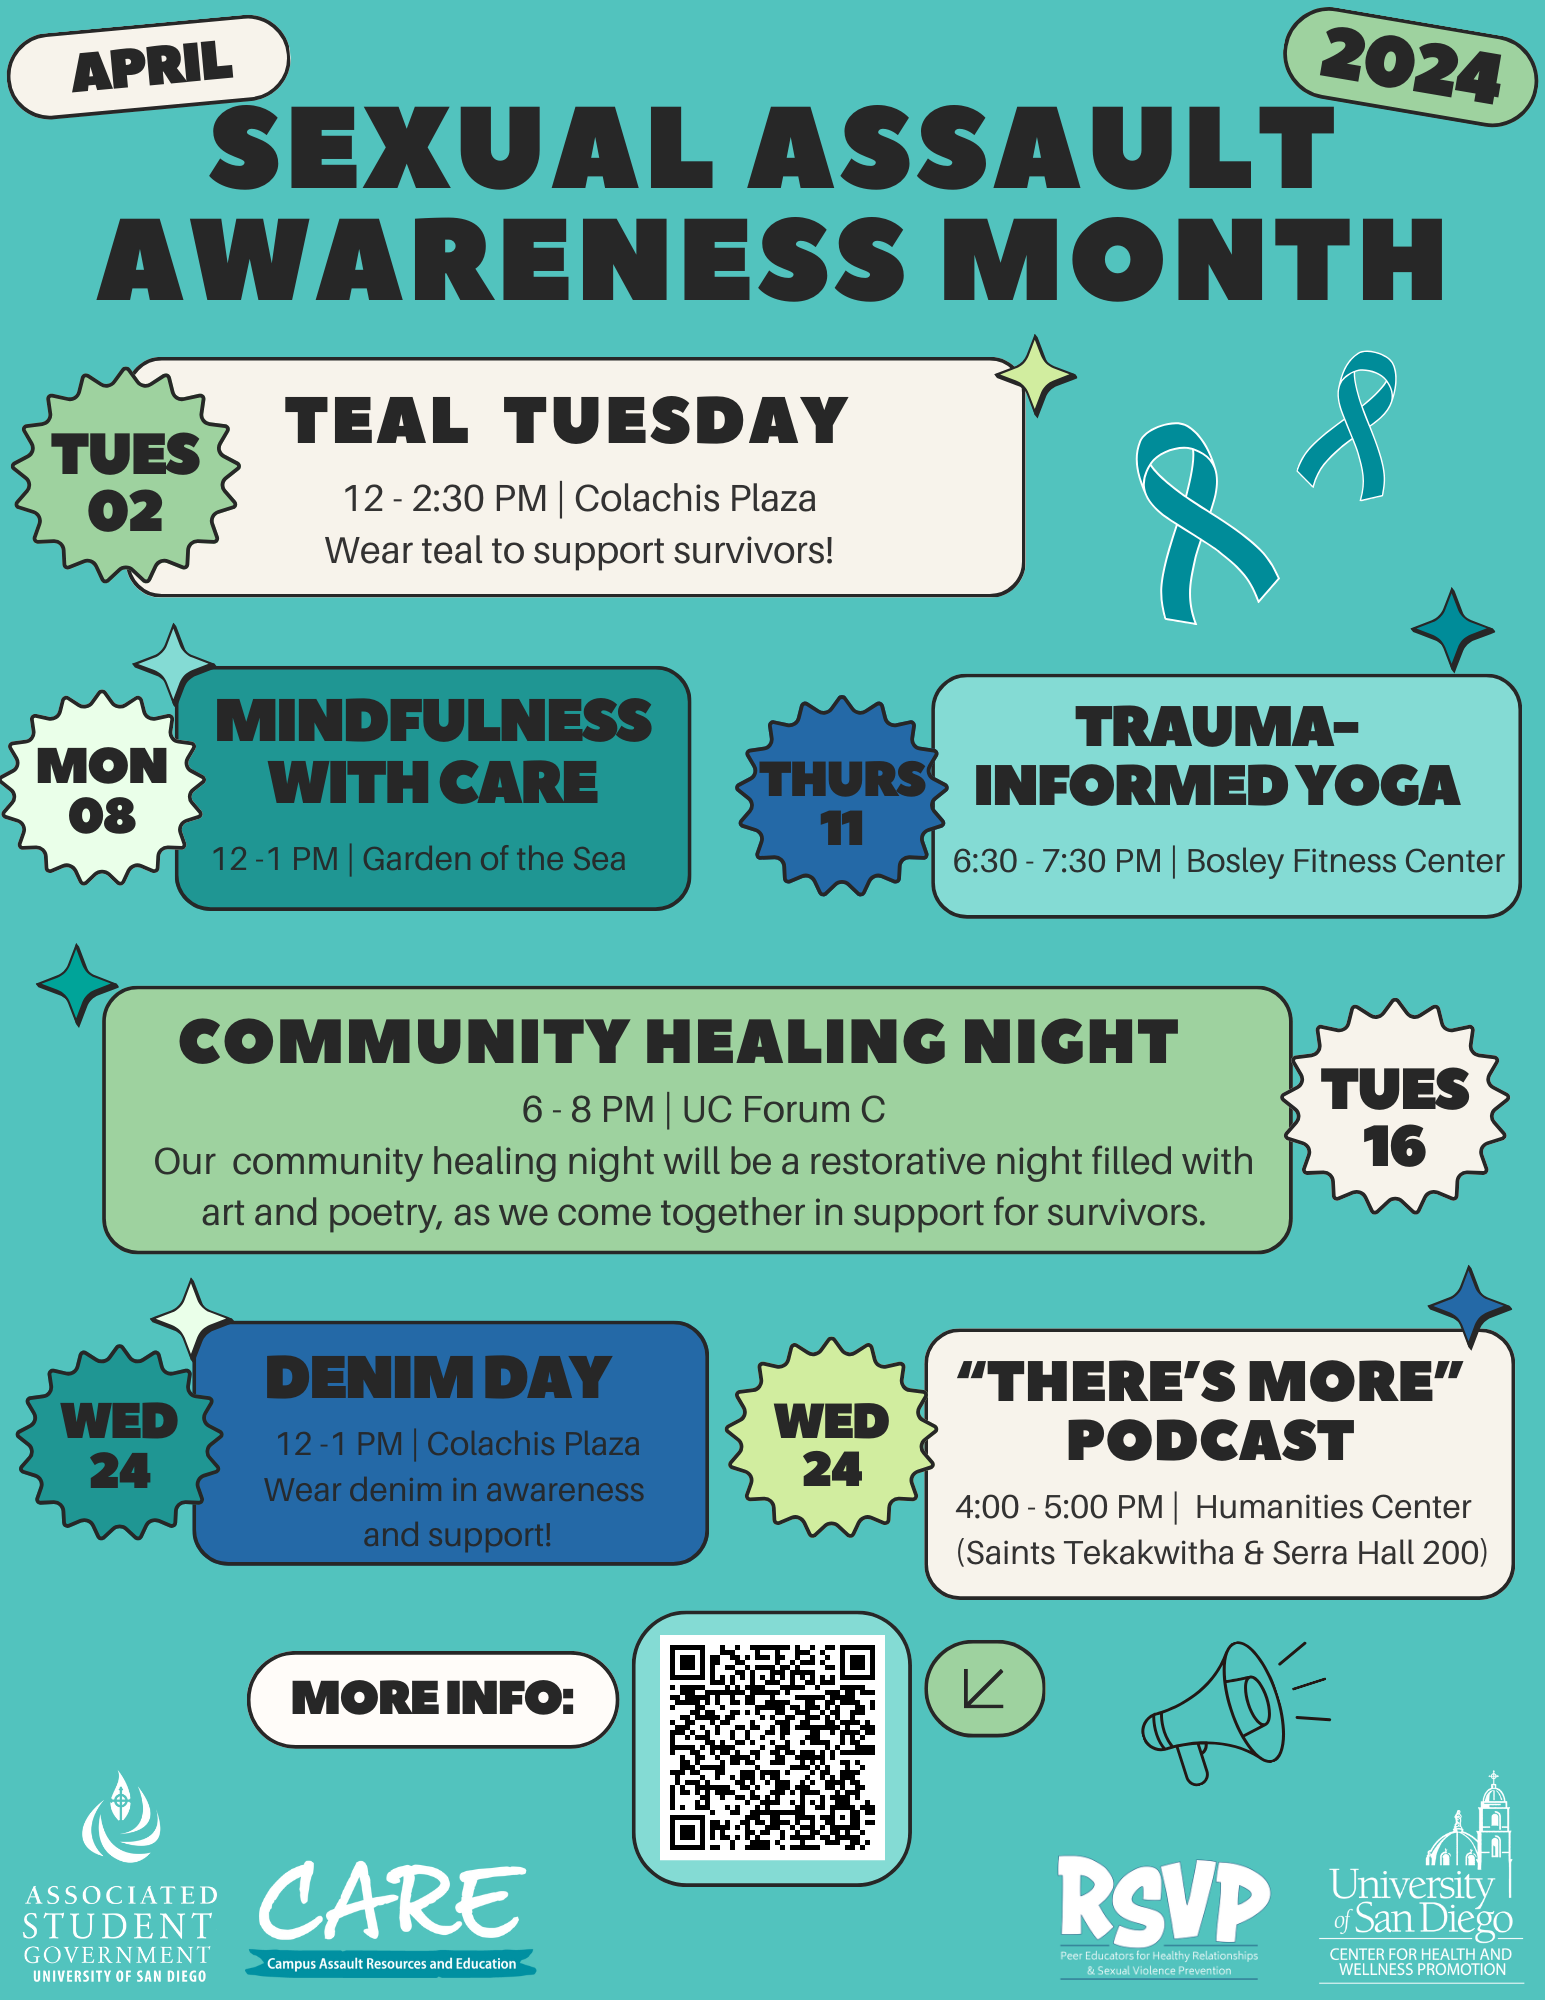 On a teal background, black bold words read “Sexual Assault Awareness Month” at the top center of the page/ Below this, there are six multicolored boxes with the following text in black: “Tues 02:” ; “Teal Tuesday, 12-2:30 PM | Colachis Plaza, Wear teal to support survivors!” ; “Mon 08:” ; “Mindfulness with CARE, 12-1 PM | Garden of the Sea” ; “Thurs 11:” ; “Trauma-Informed Yoga, 6:30-7:30 PM | Bosley Fitness Center” ; “Community Healing Night, 6-8 PM | UC Forum C, Our community healing night will be a restorative night filled with art and poetry, as we come together in support for survivors” ; “:Tues 16” ; “Wed 24:” ; “Denim Day, 12-1PM | Colachis Plaza, Wear denim in awareness and support!” ; “Wed 24:” ; “‘There’s More’ Podcast, 4:00-5:00PM | Humanities Center (Saints Tekakwitha & Serra Hall 200)” ; “More Info:” - next to a QR code located at the bottom center of the page with logos. 